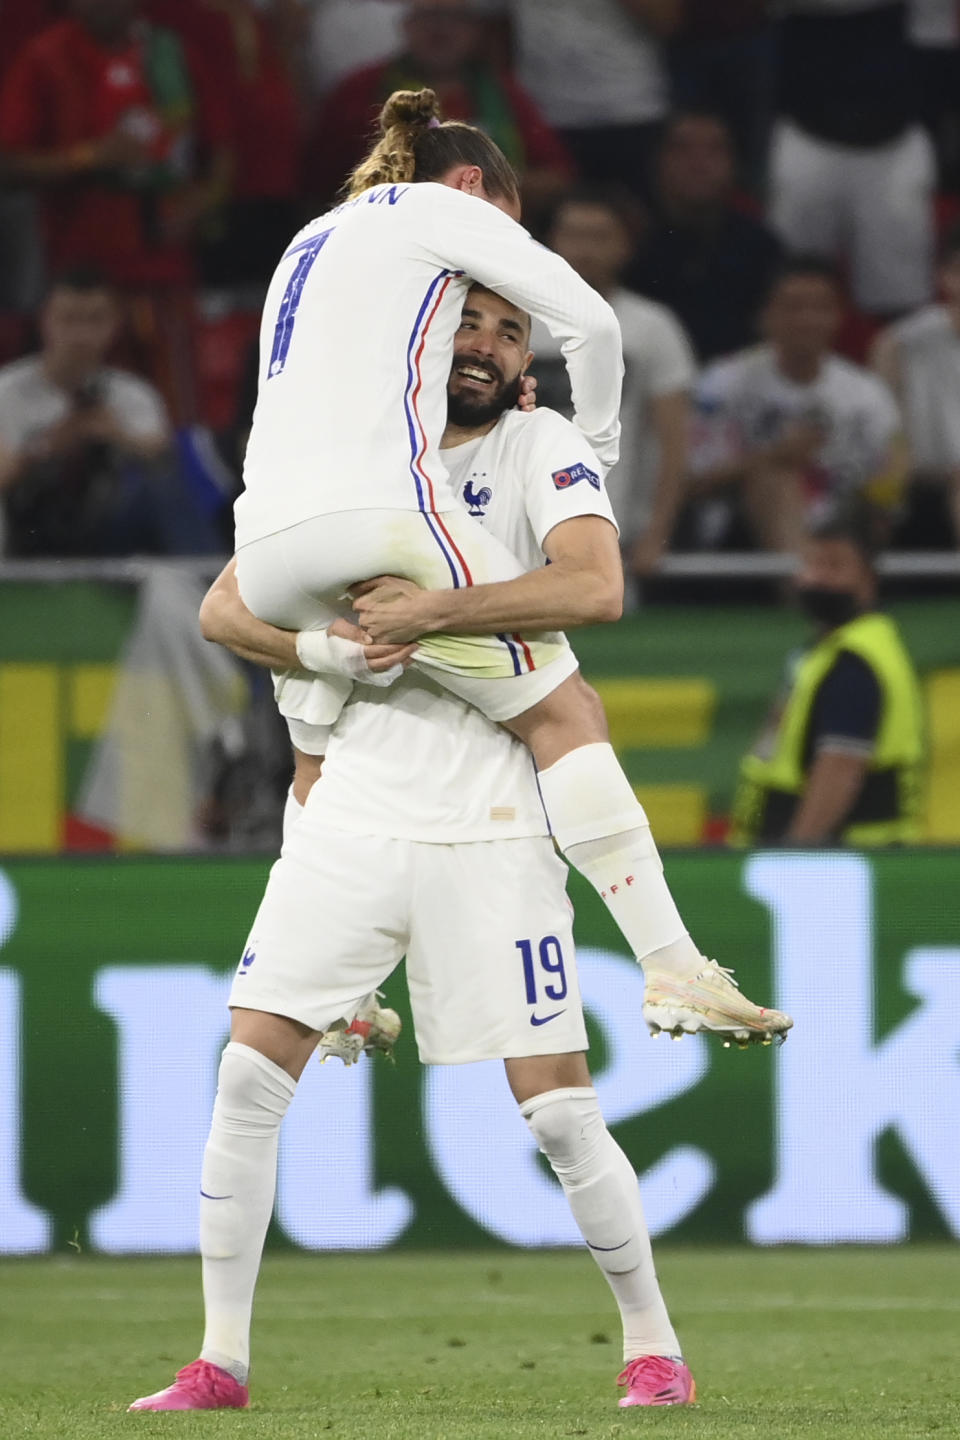 France's Karim Benzema celebrates with Antoine Griezmann, left,after scoring his side's second goal during the Euro 2020 soccer championship group F match between Portugal and France at the Puskas Arena in Budapest, Wednesday, June 23, 2021. (Franck Fife, Pool photo via AP)